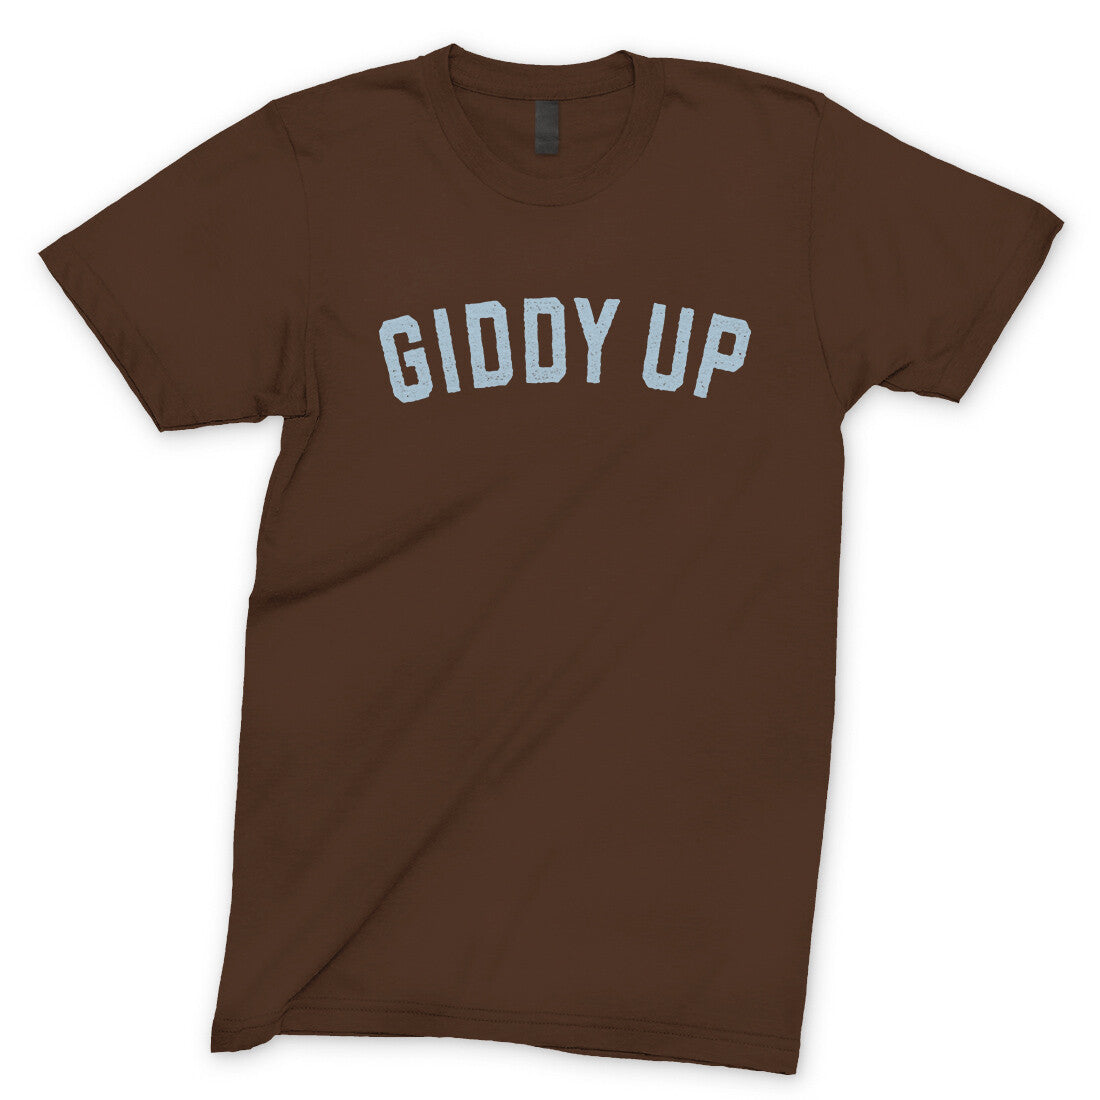 Giddy Up in Dark Chocolate Color